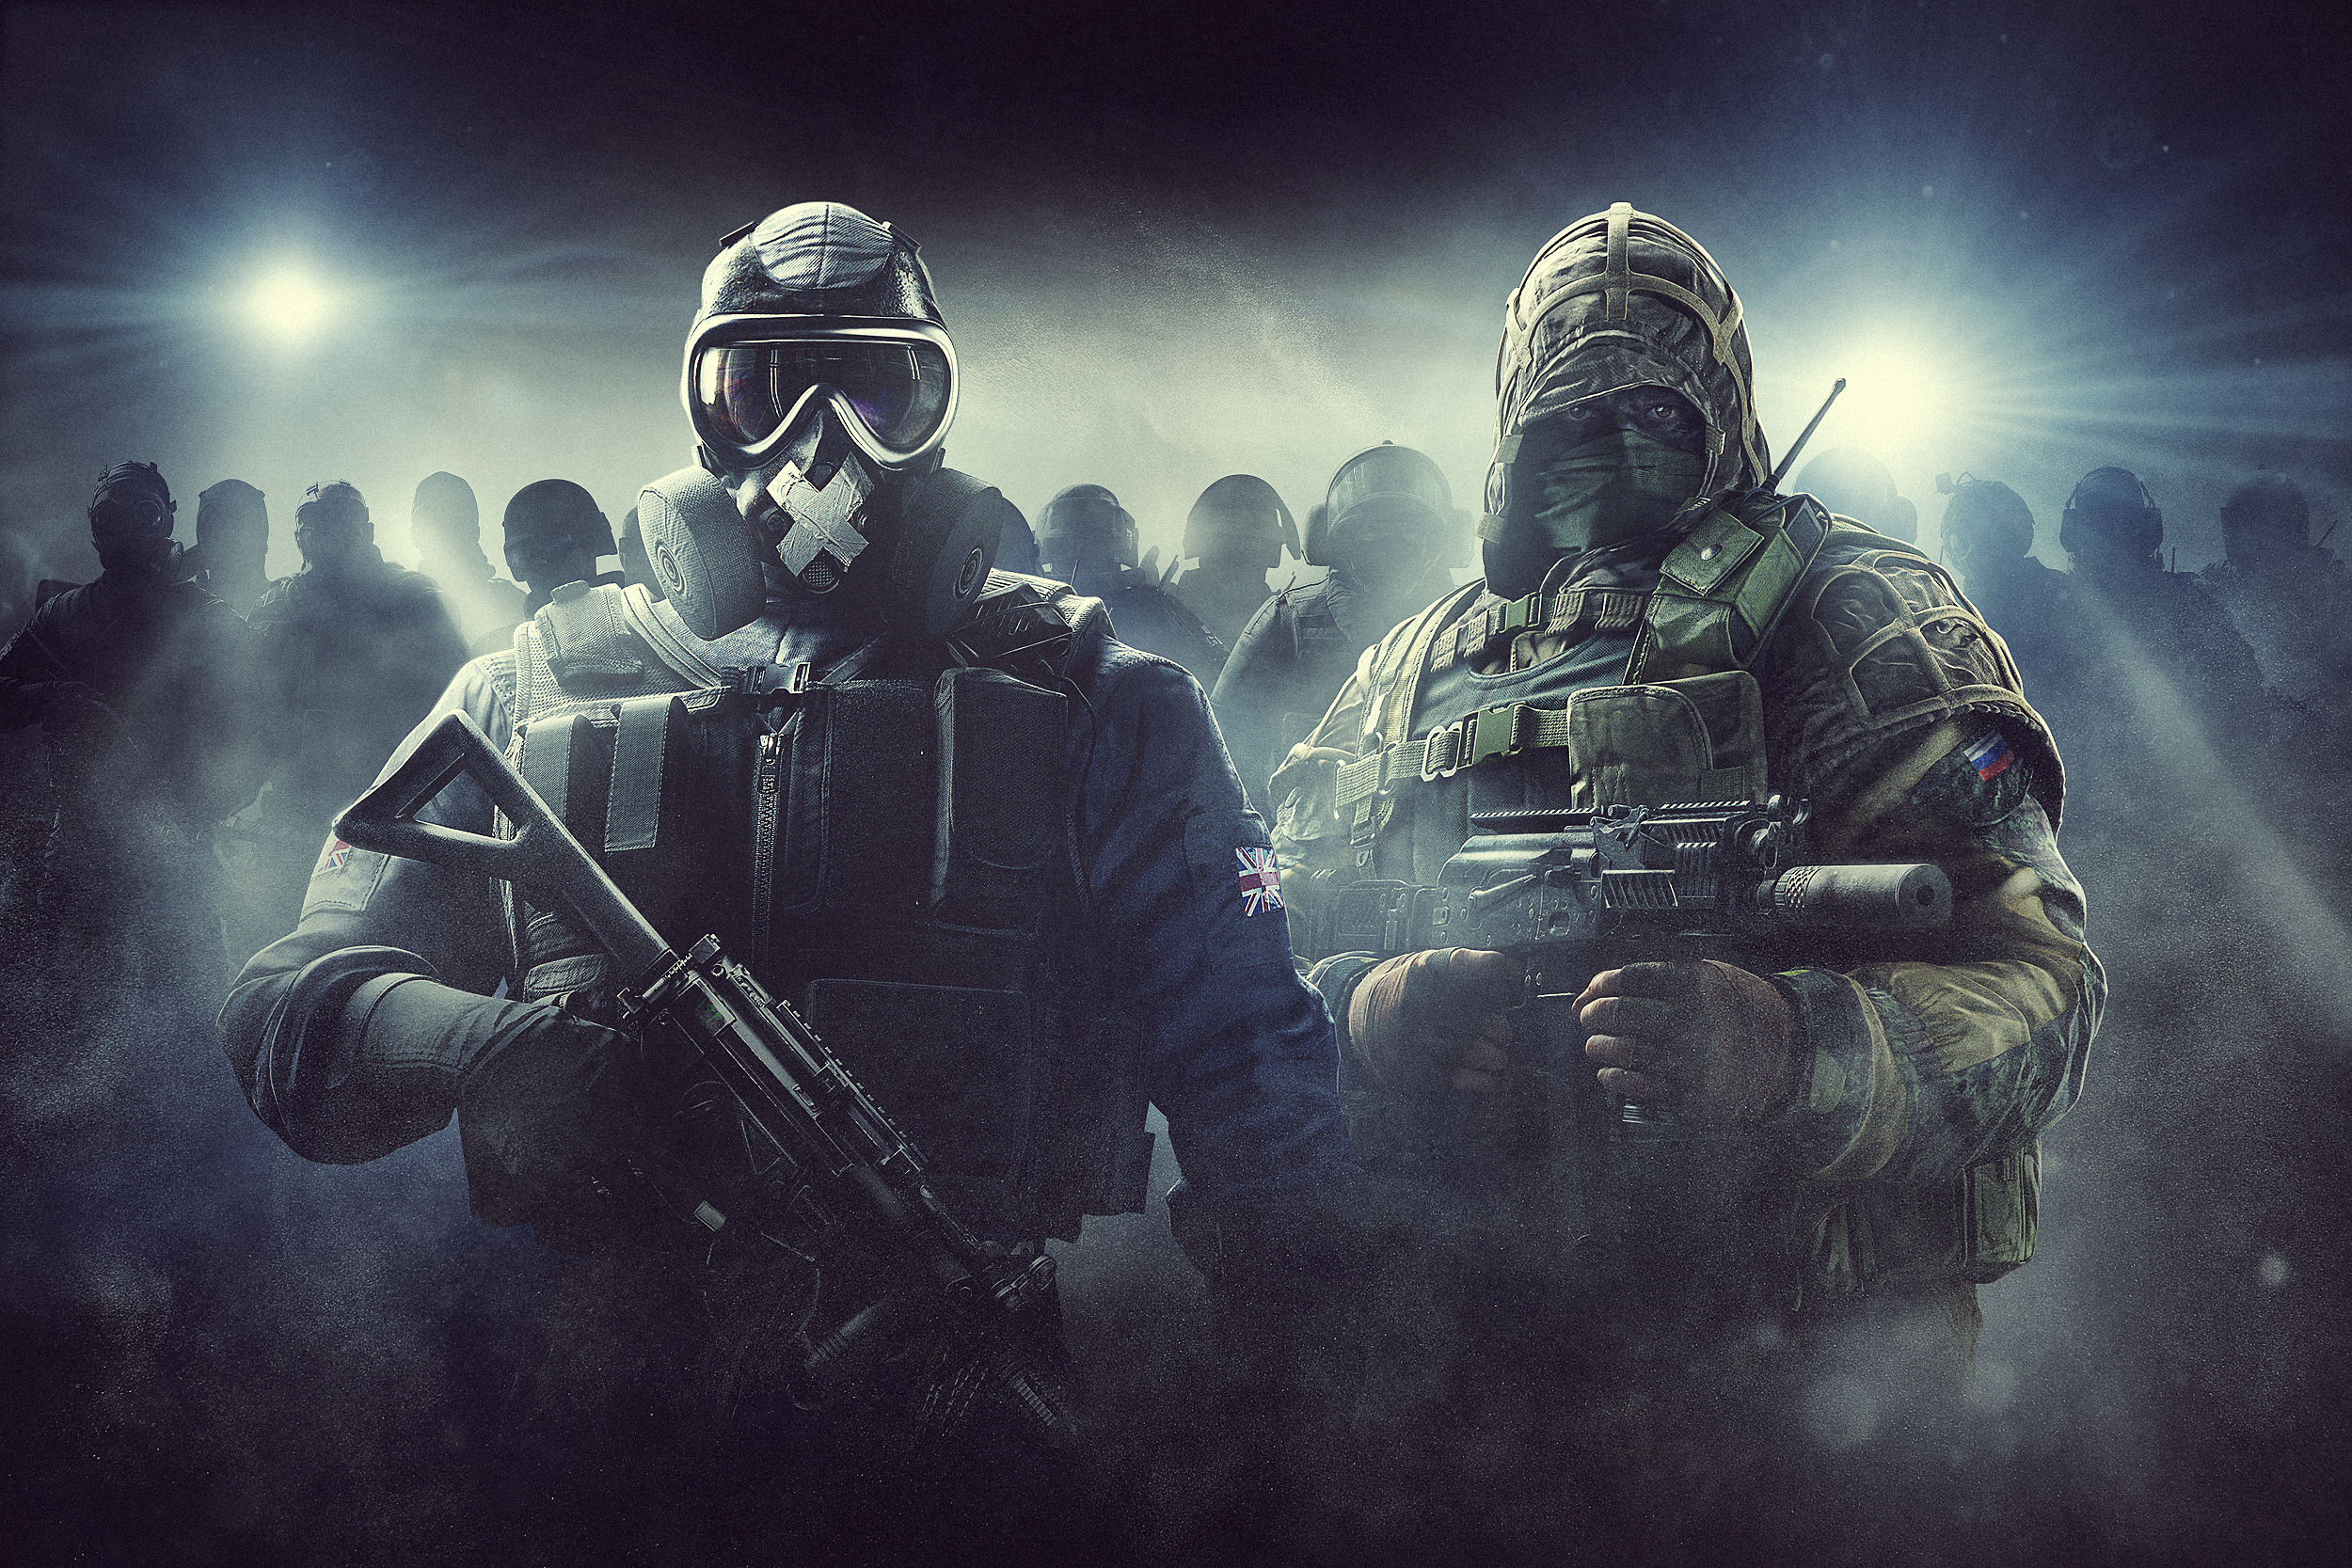 What Can We Expect from the Rainbow Six Siege Marketplace Full Release in Y9S2?